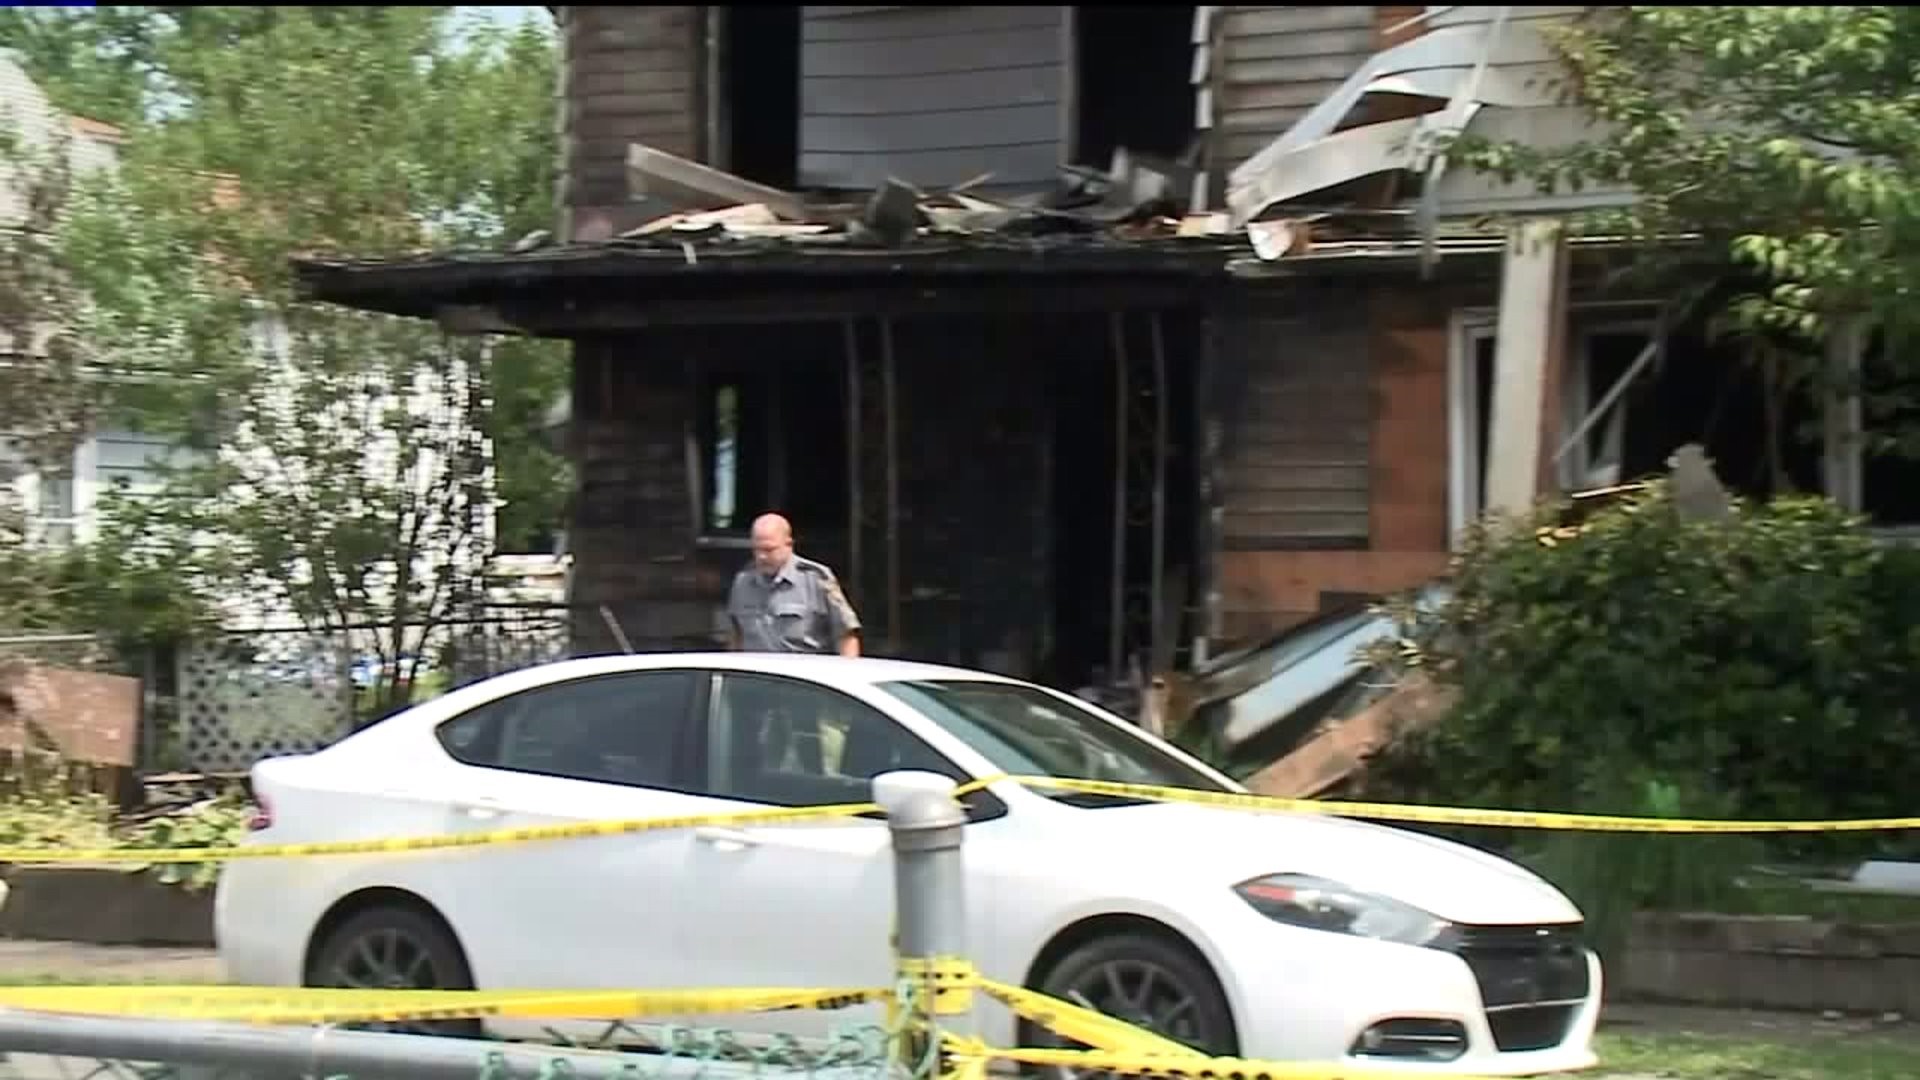 11-Year-Old Boy Dead After Fire in Pittston